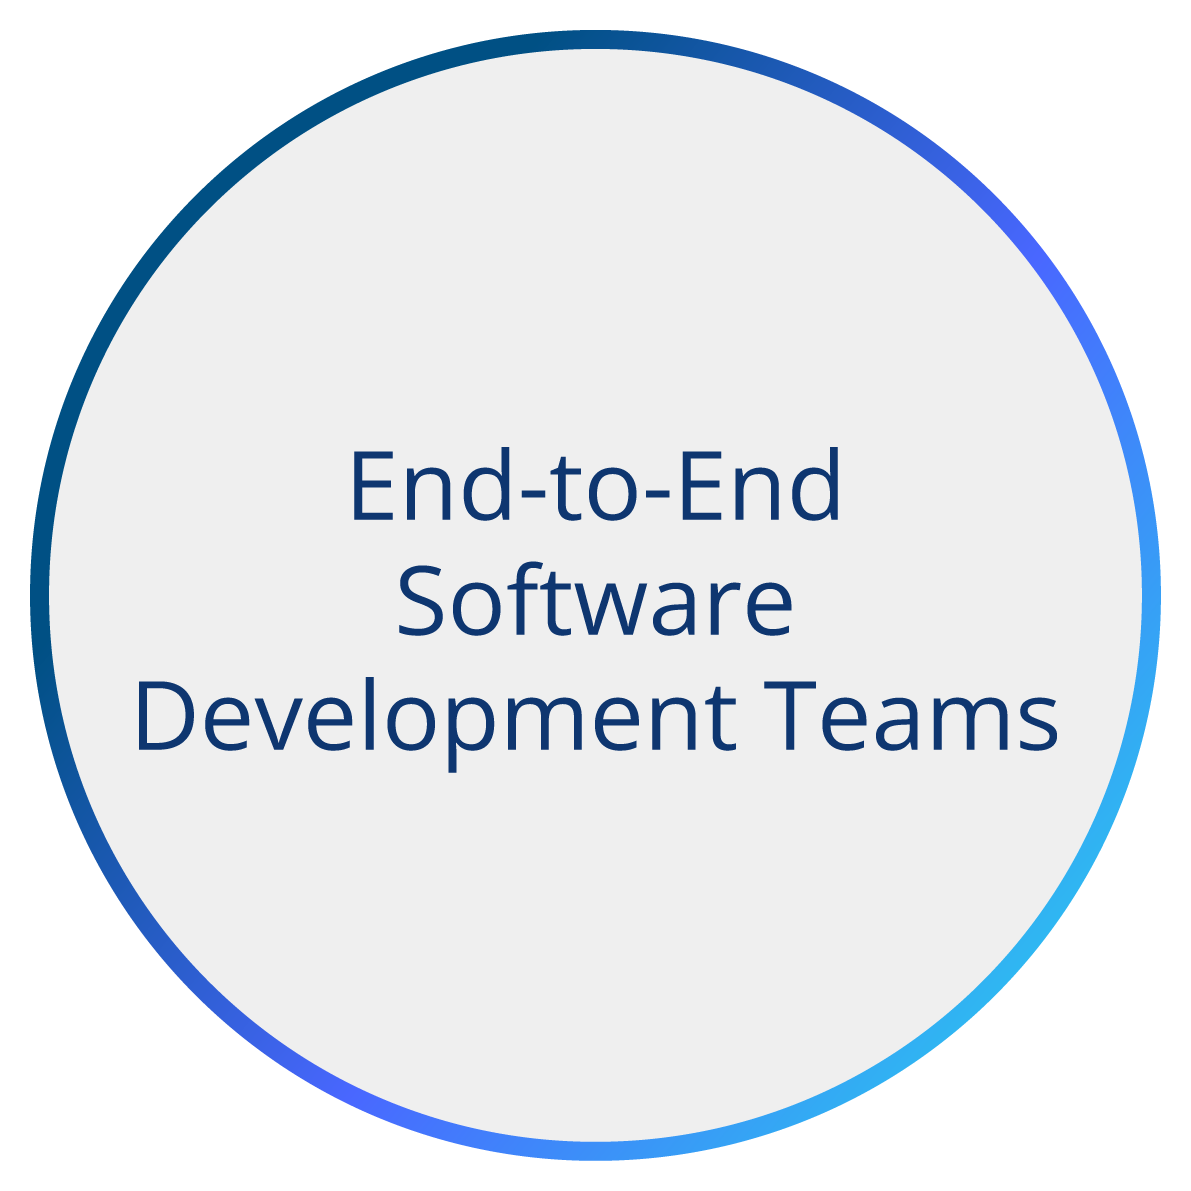 End-to-End Software Development Teams